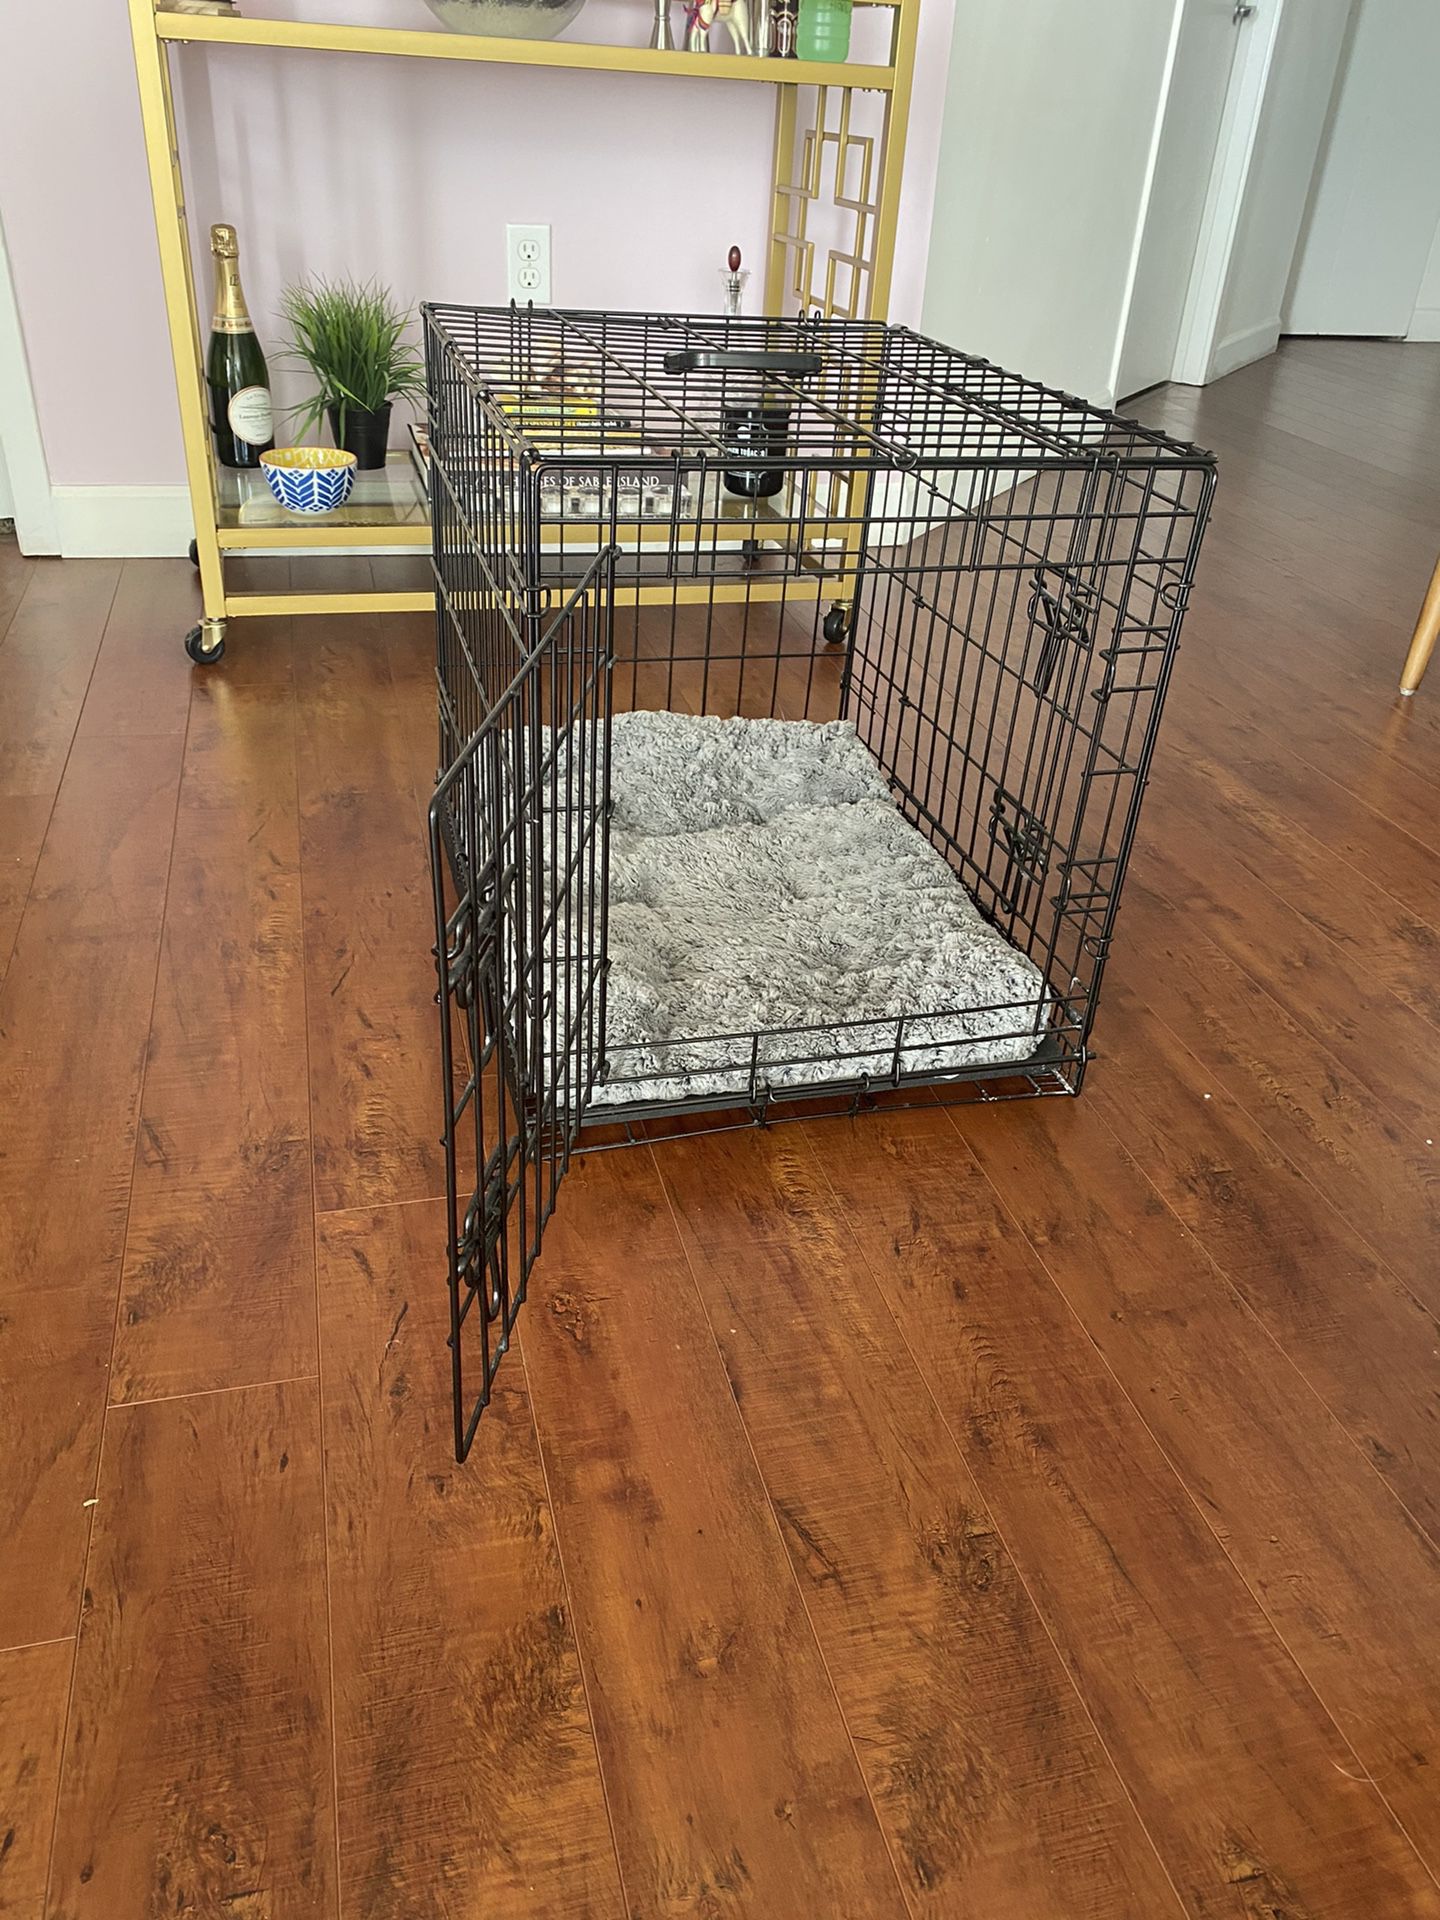 Dog crate/ cage